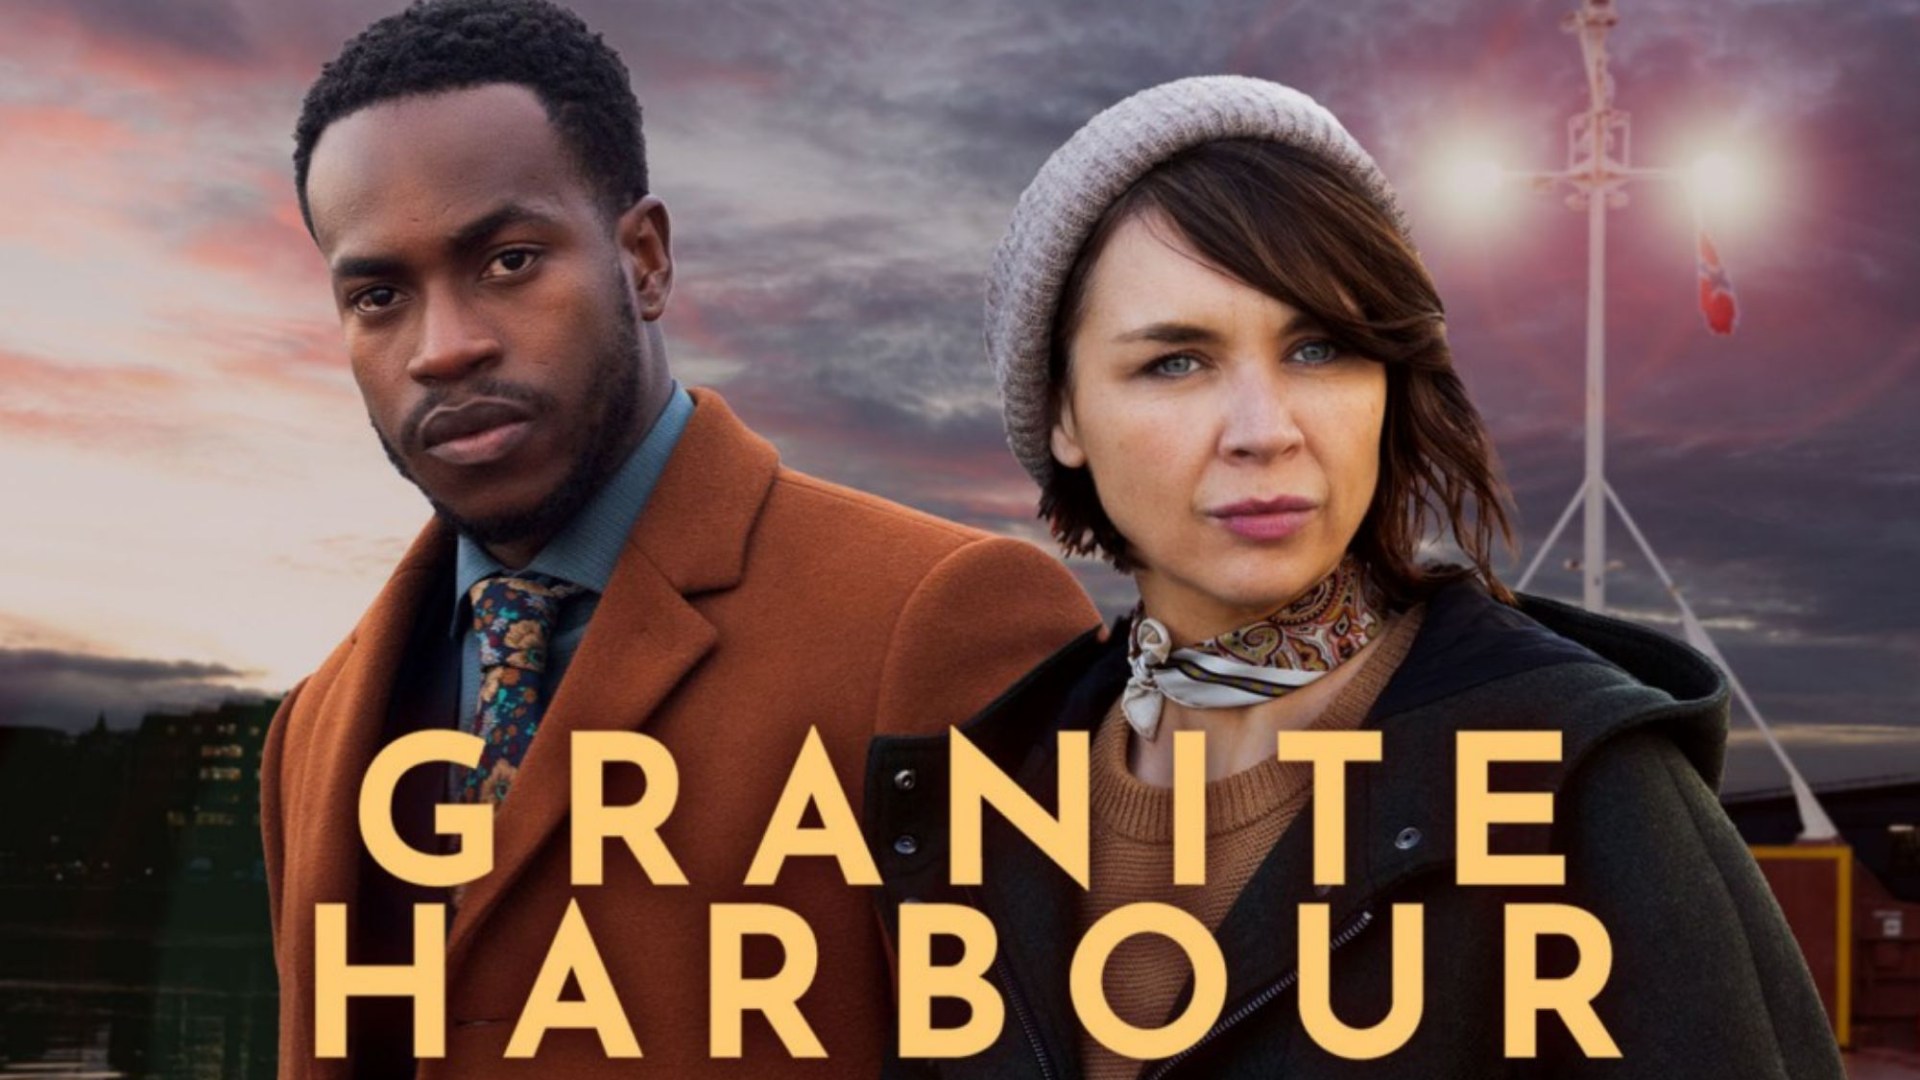 Granite Harbour cast, plot and filming locations explained  all about the BBC drama [Video]